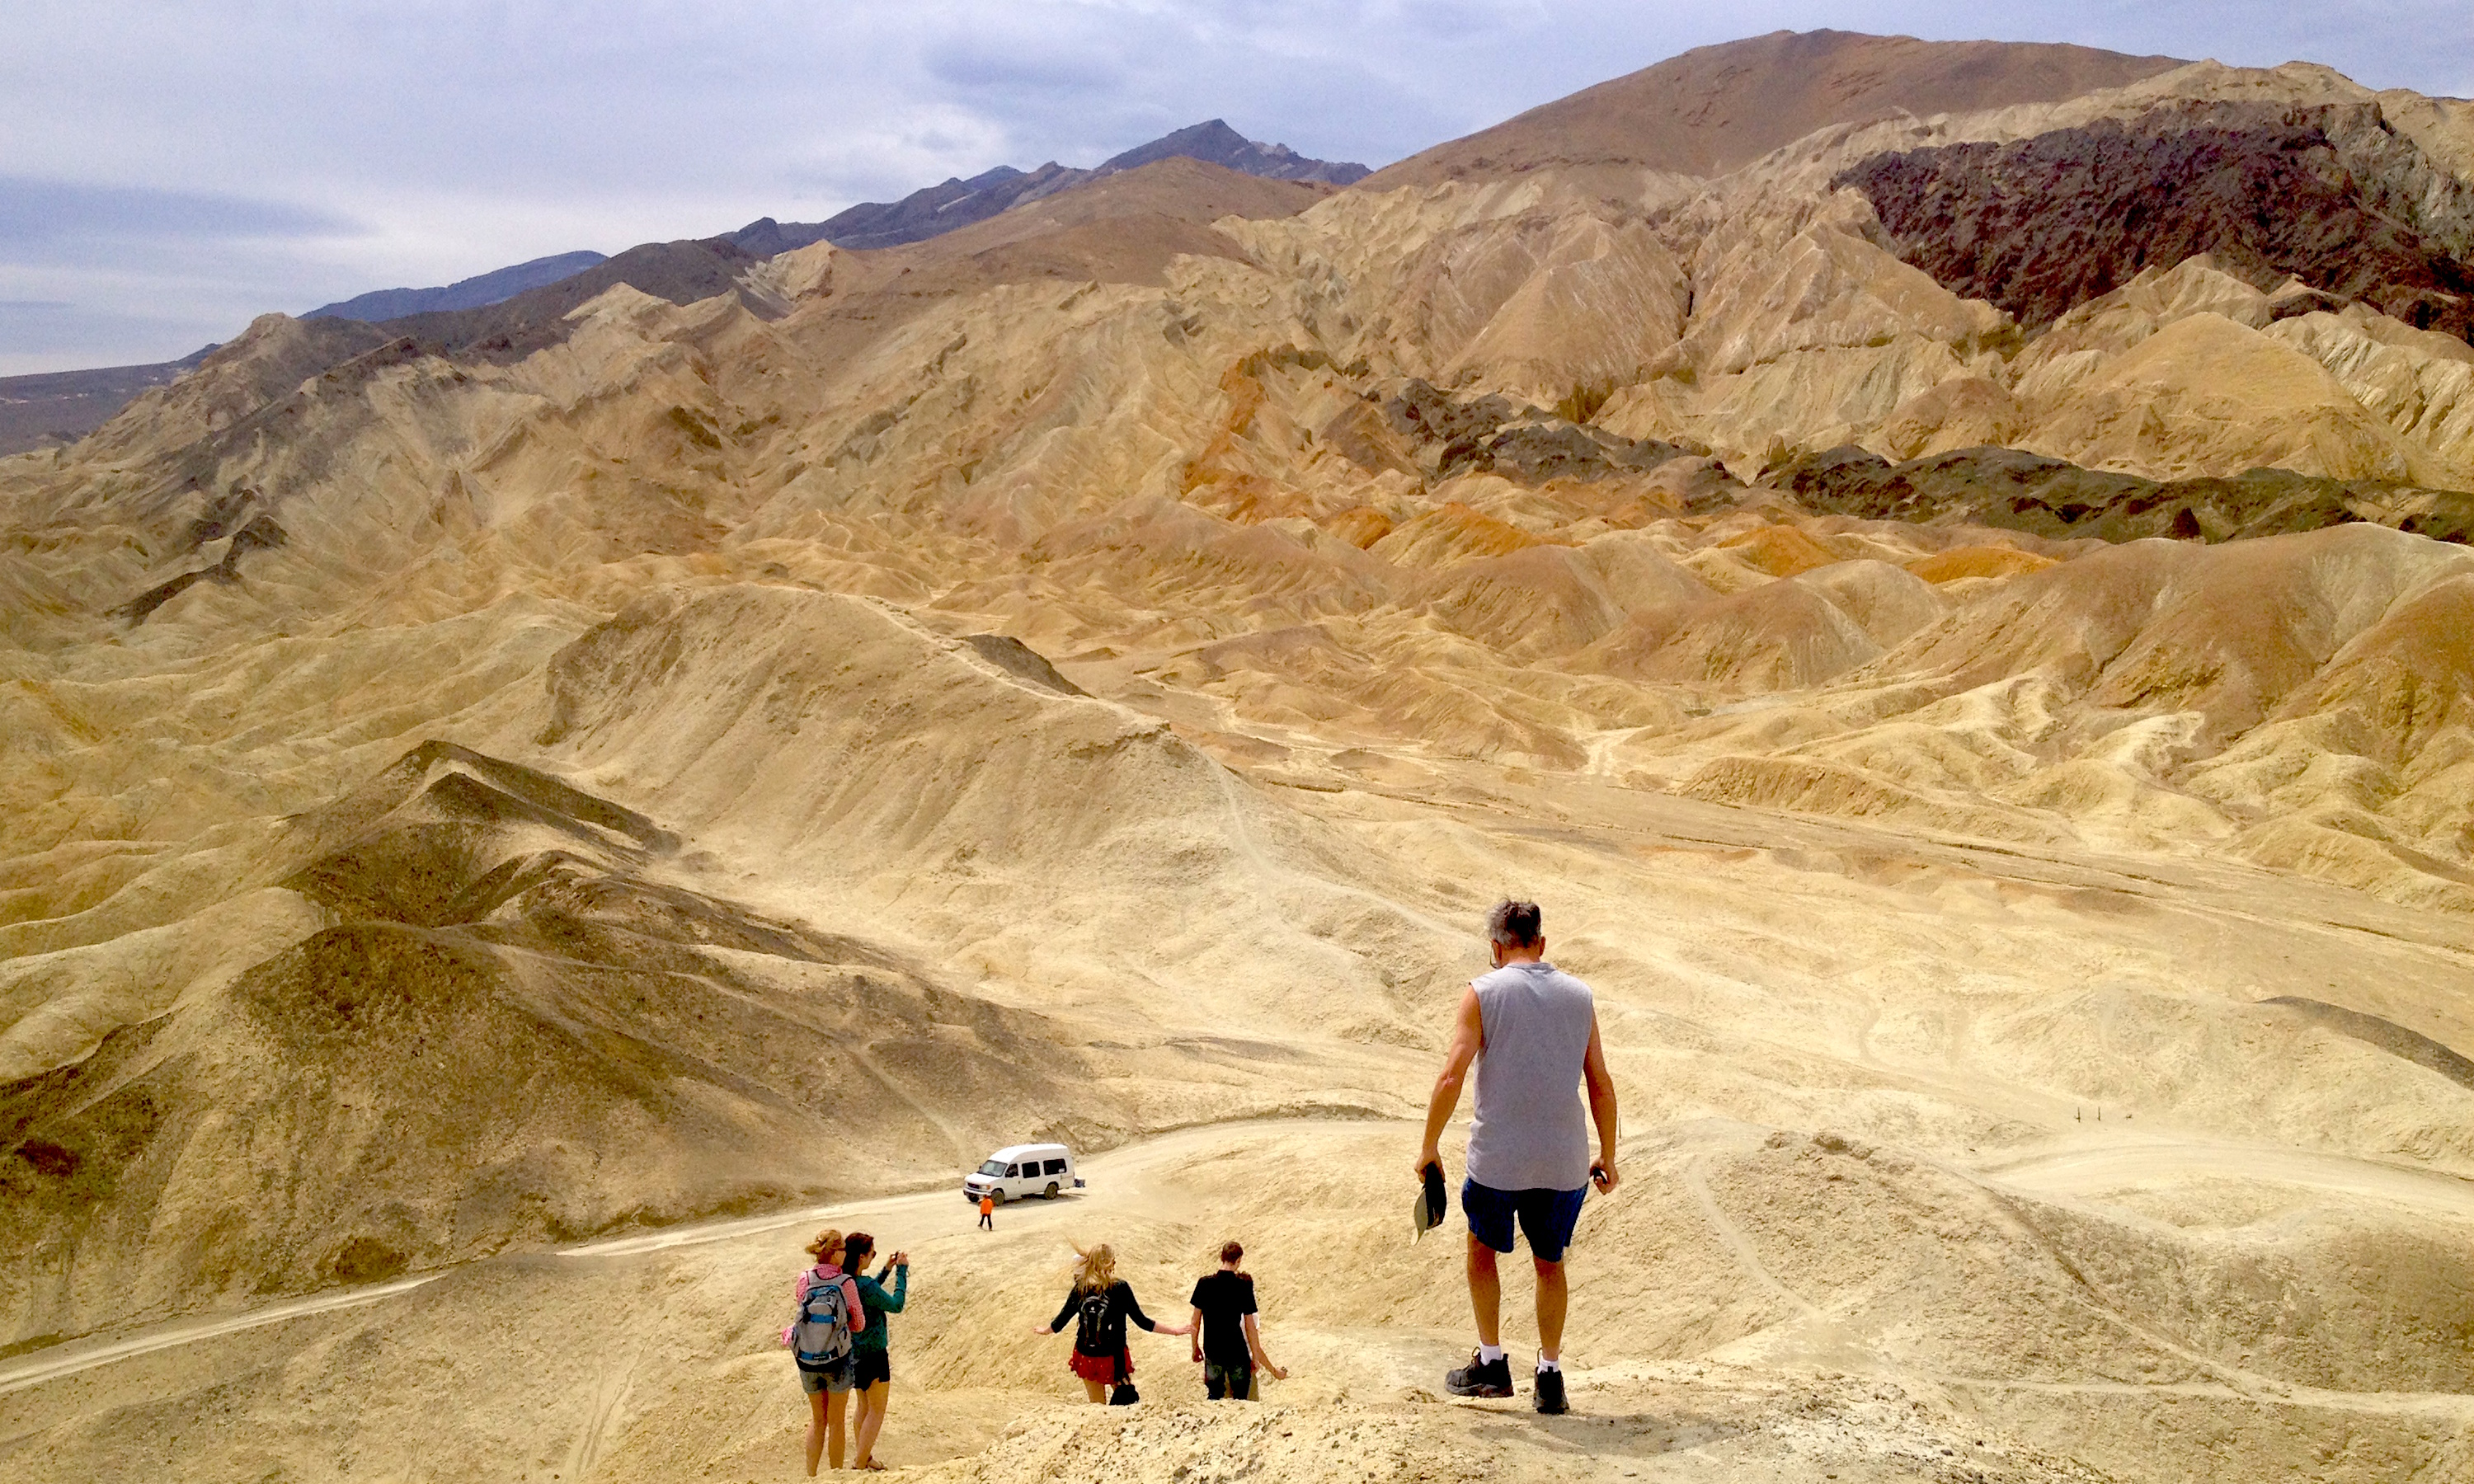 4-Day National Parks Lodging Tour from Las Vegas: Death Valley National Park and Yosemite National Park | 14 Pax Small Group | Park Entries Included | Multi-language